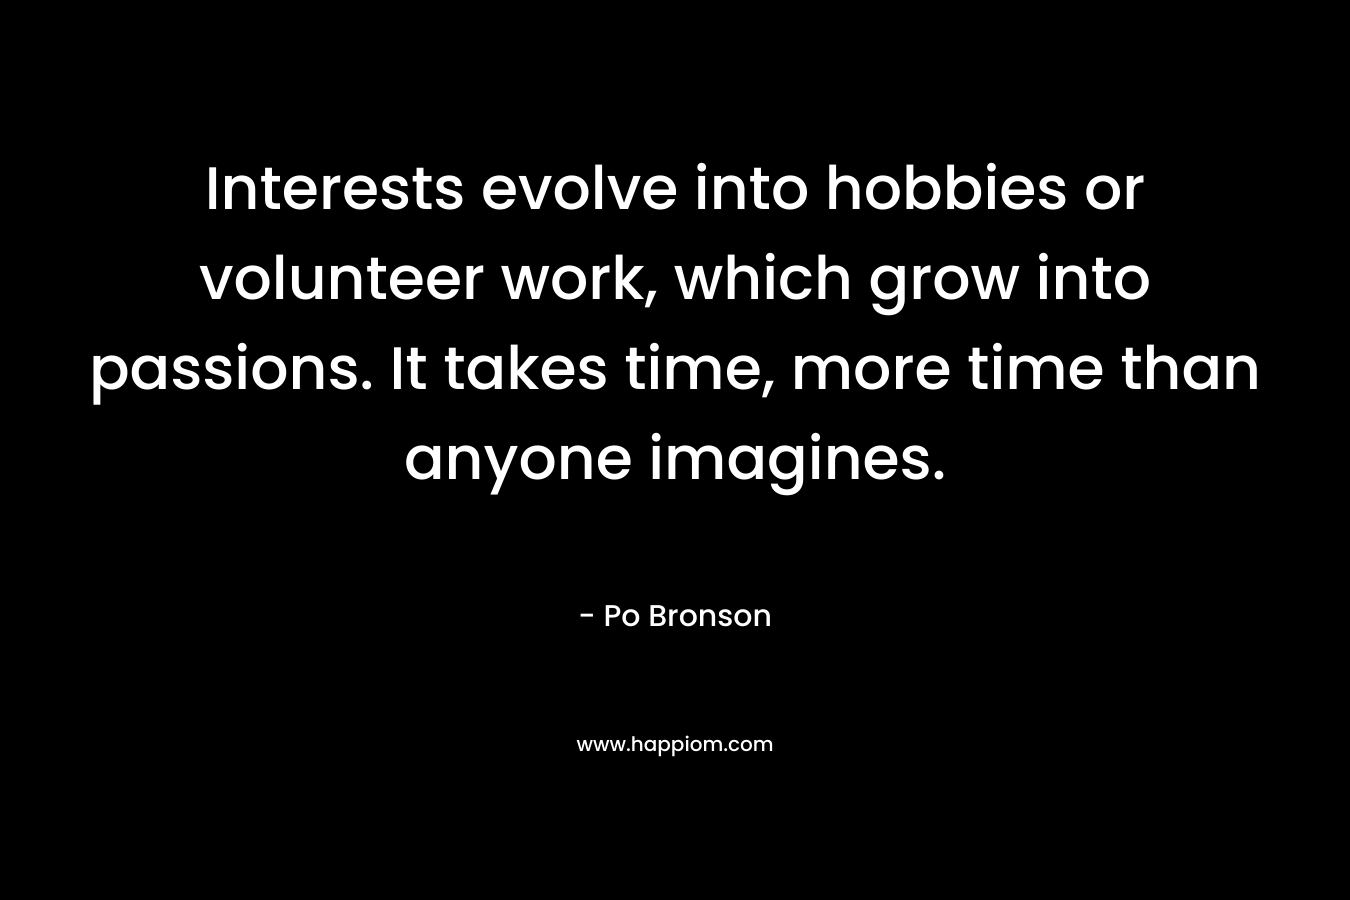 Interests evolve into hobbies or volunteer work, which grow into passions. It takes time, more time than anyone imagines. – Po Bronson